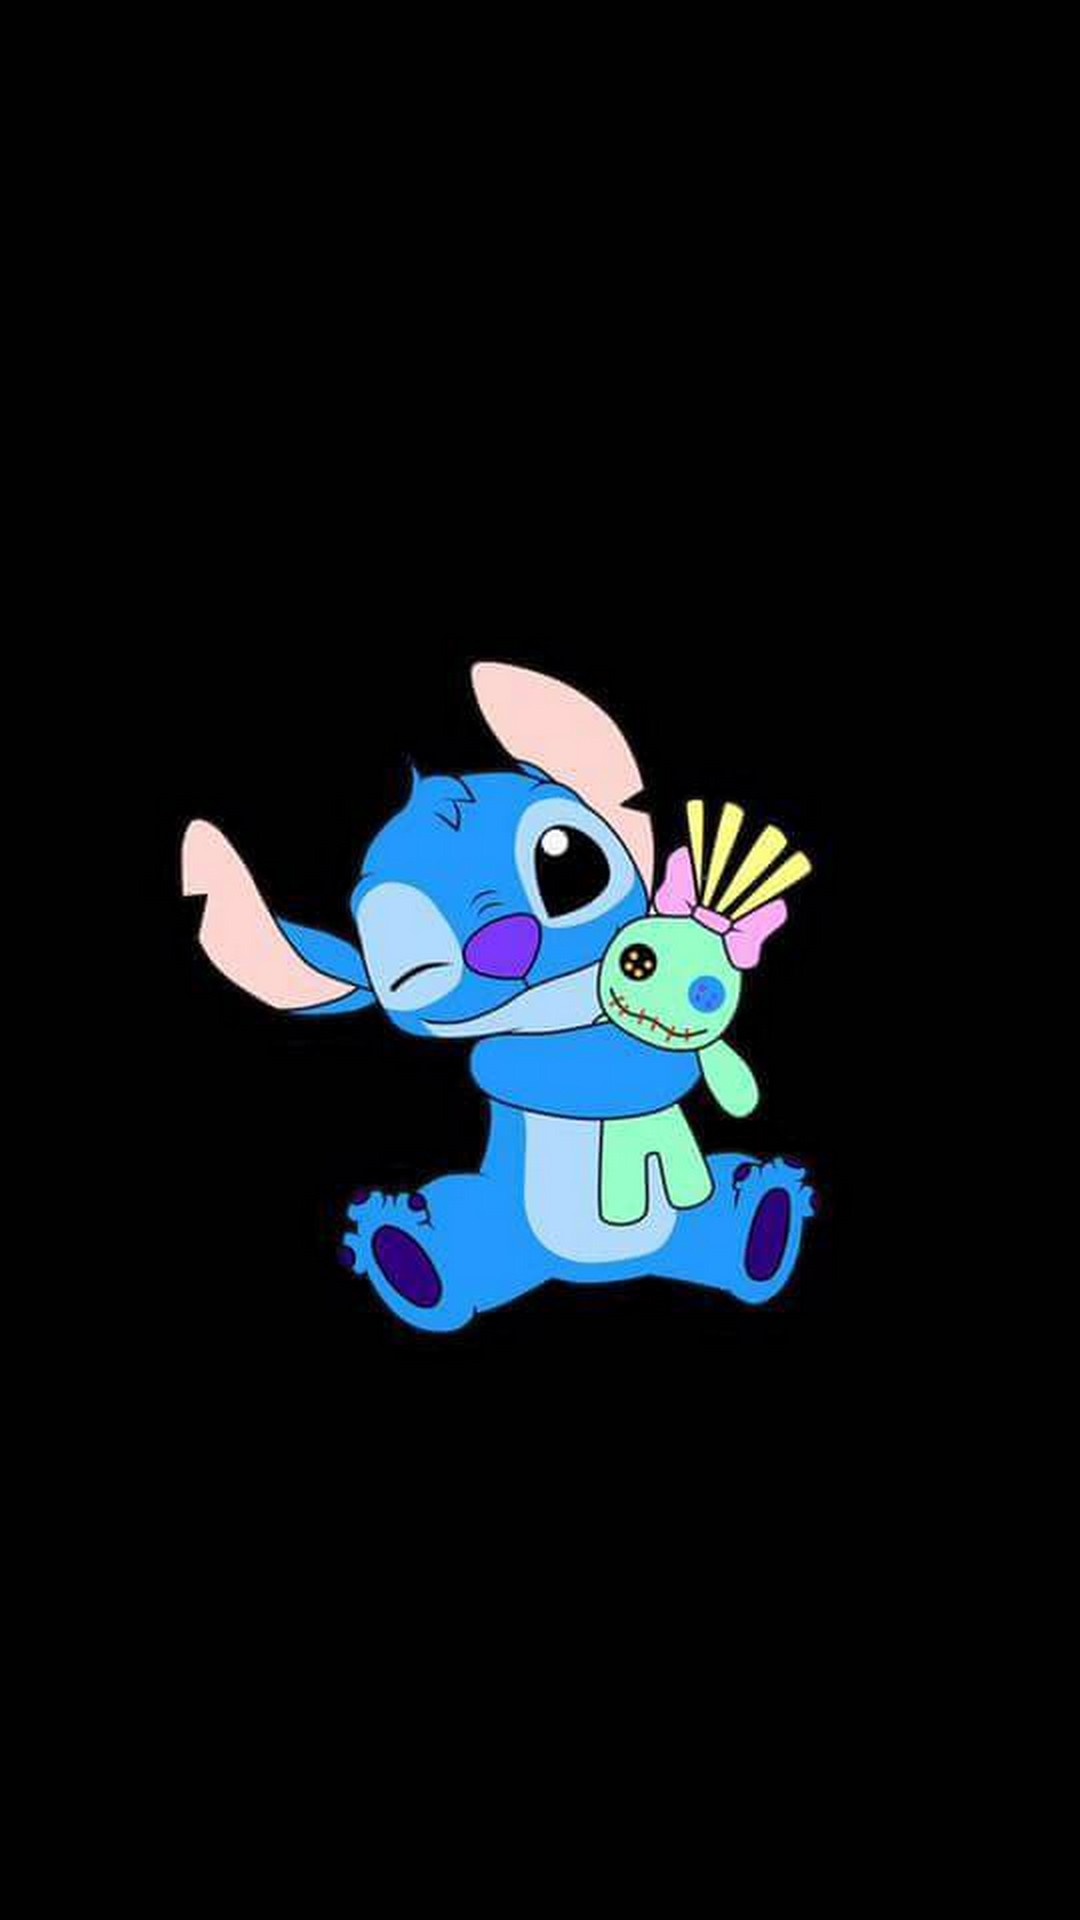 Stitch HD Wallpapers For Mobile Resolution 1080x1920